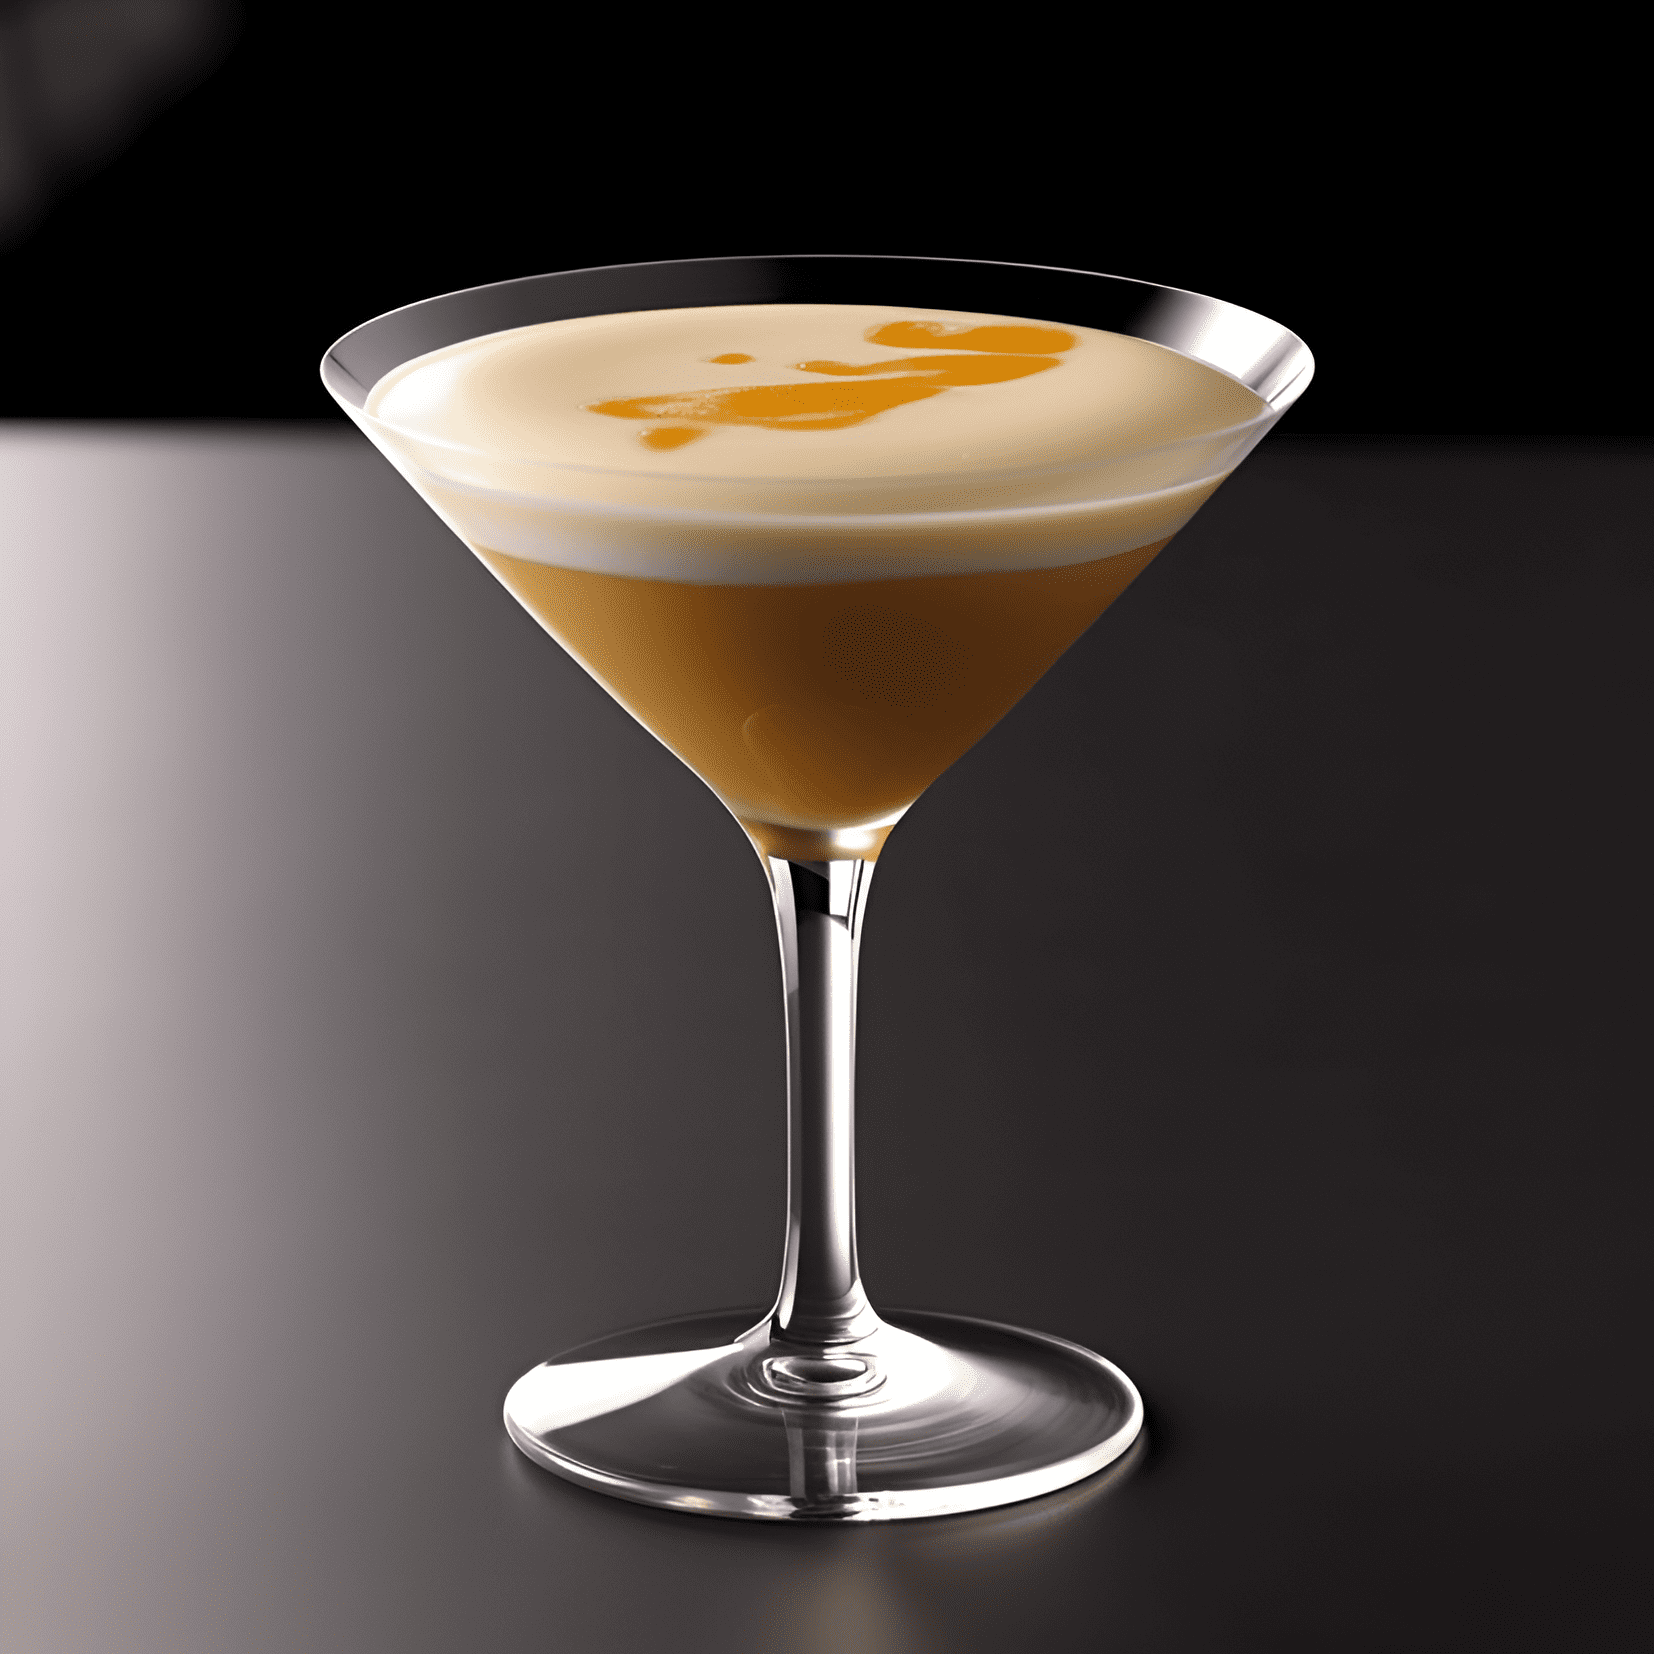 Zabaglione Cocktail Recipe - The Zabaglione cocktail is sweet, creamy, and rich with a hint of fruity flavors from the sweet wine. It has a velvety texture and a luxurious mouthfeel, making it a delightful indulgence.